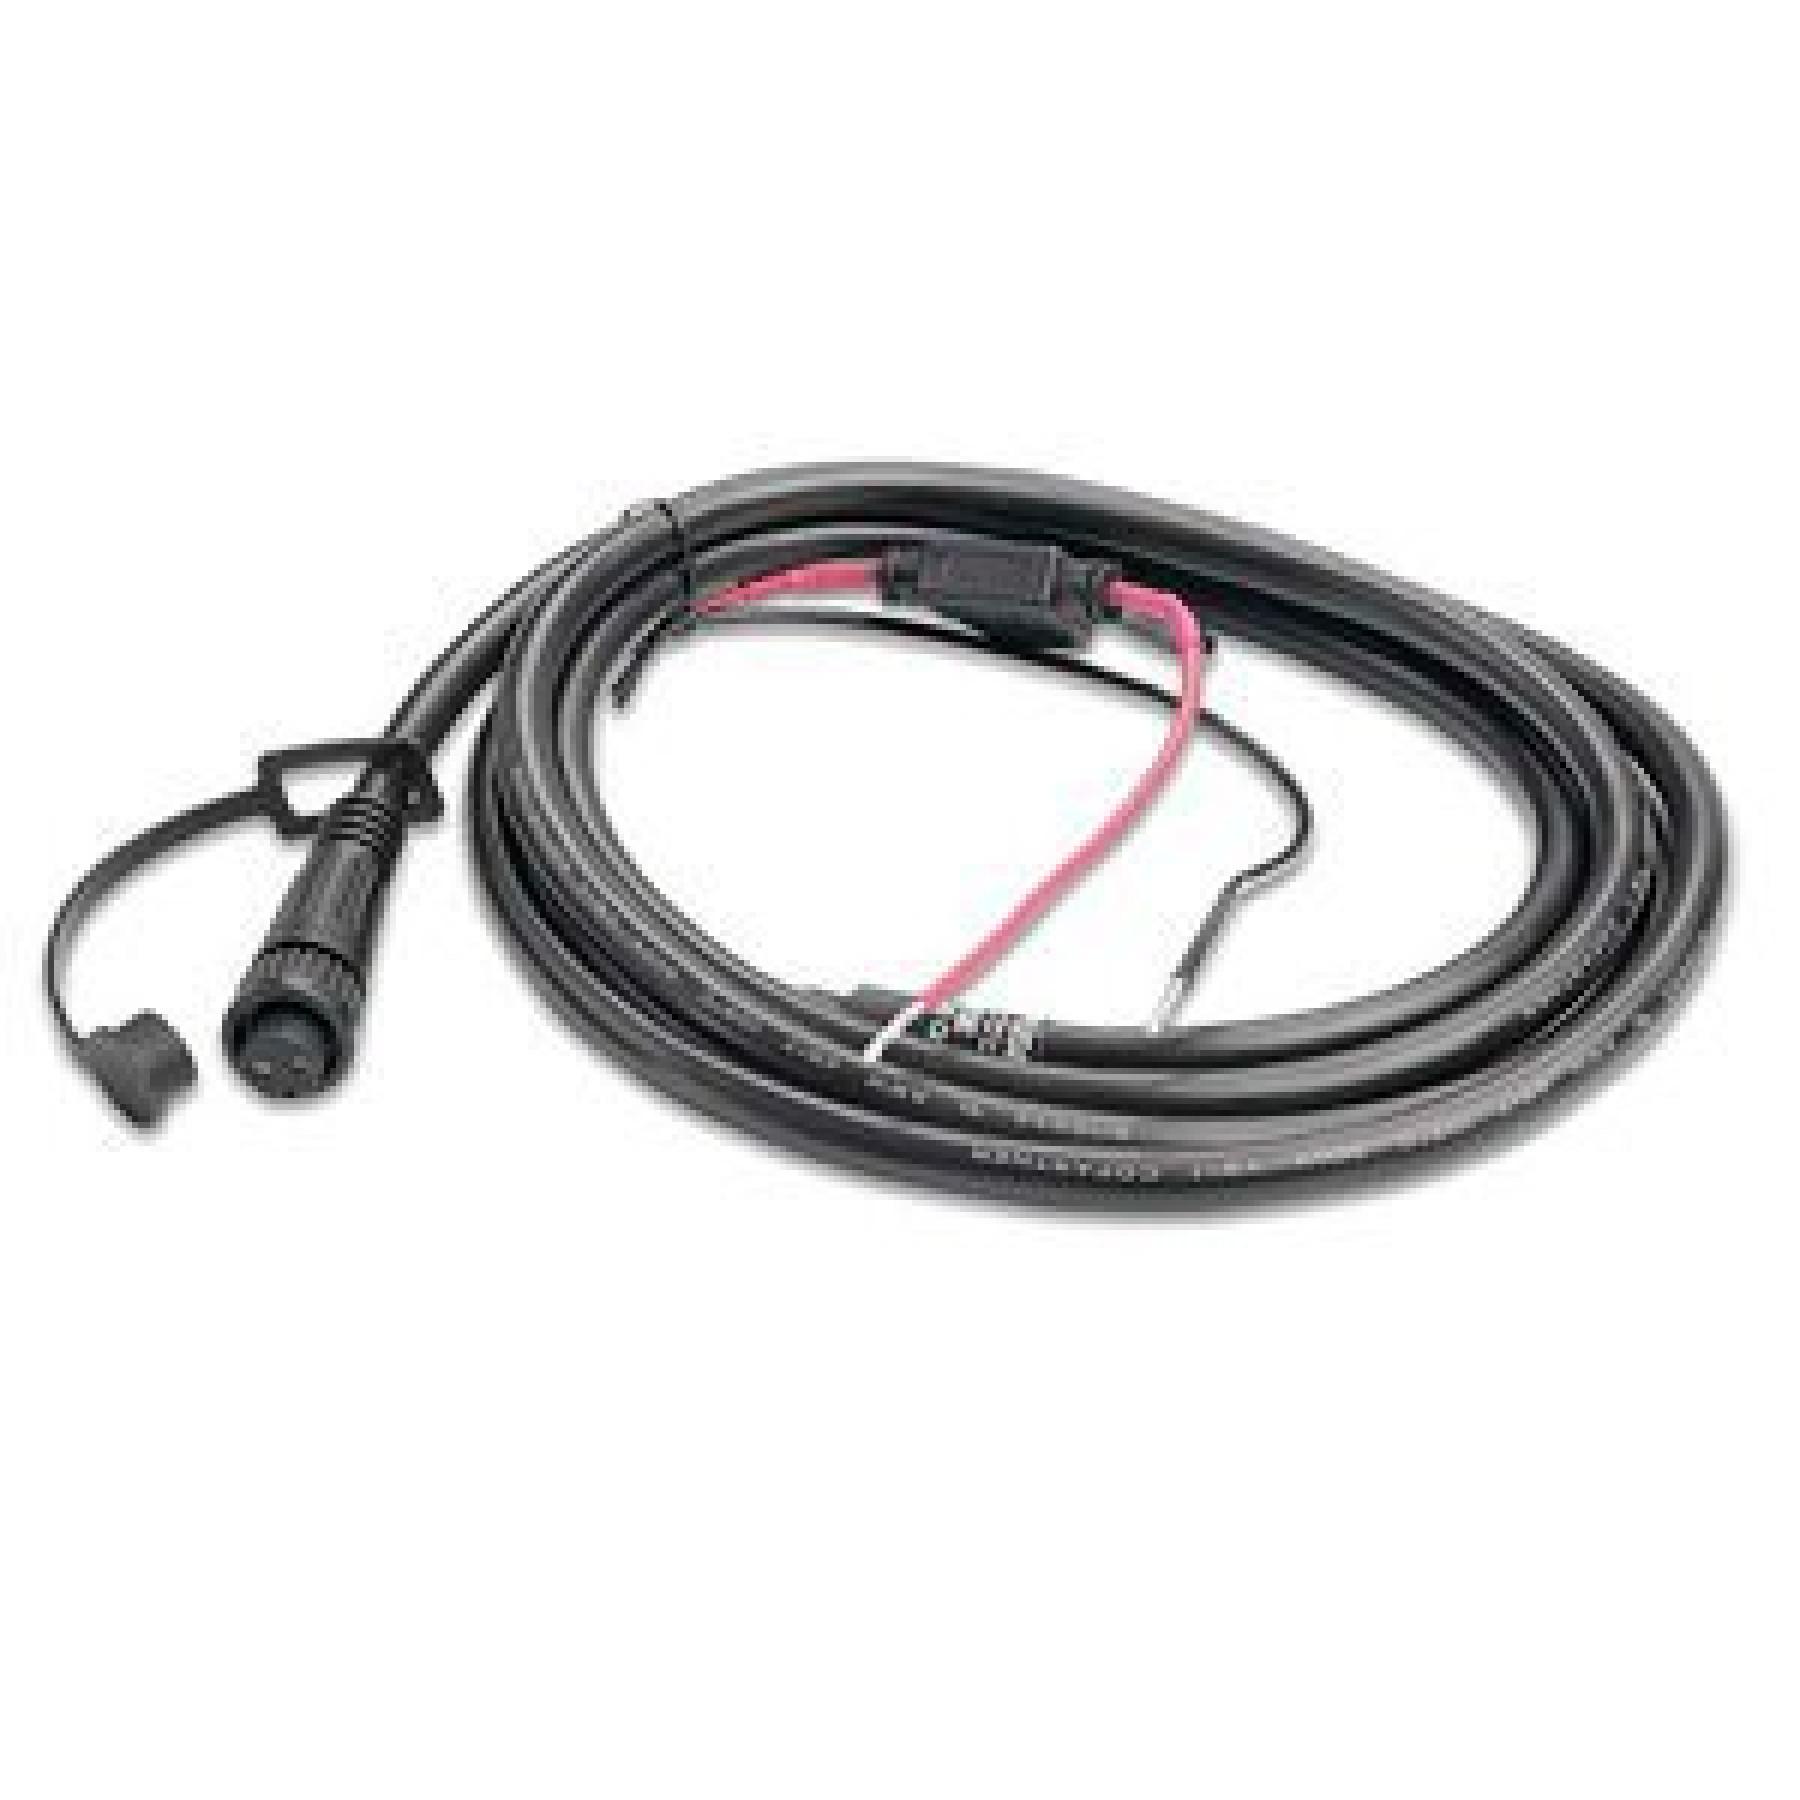 Cable Garmin 2-pin power cable